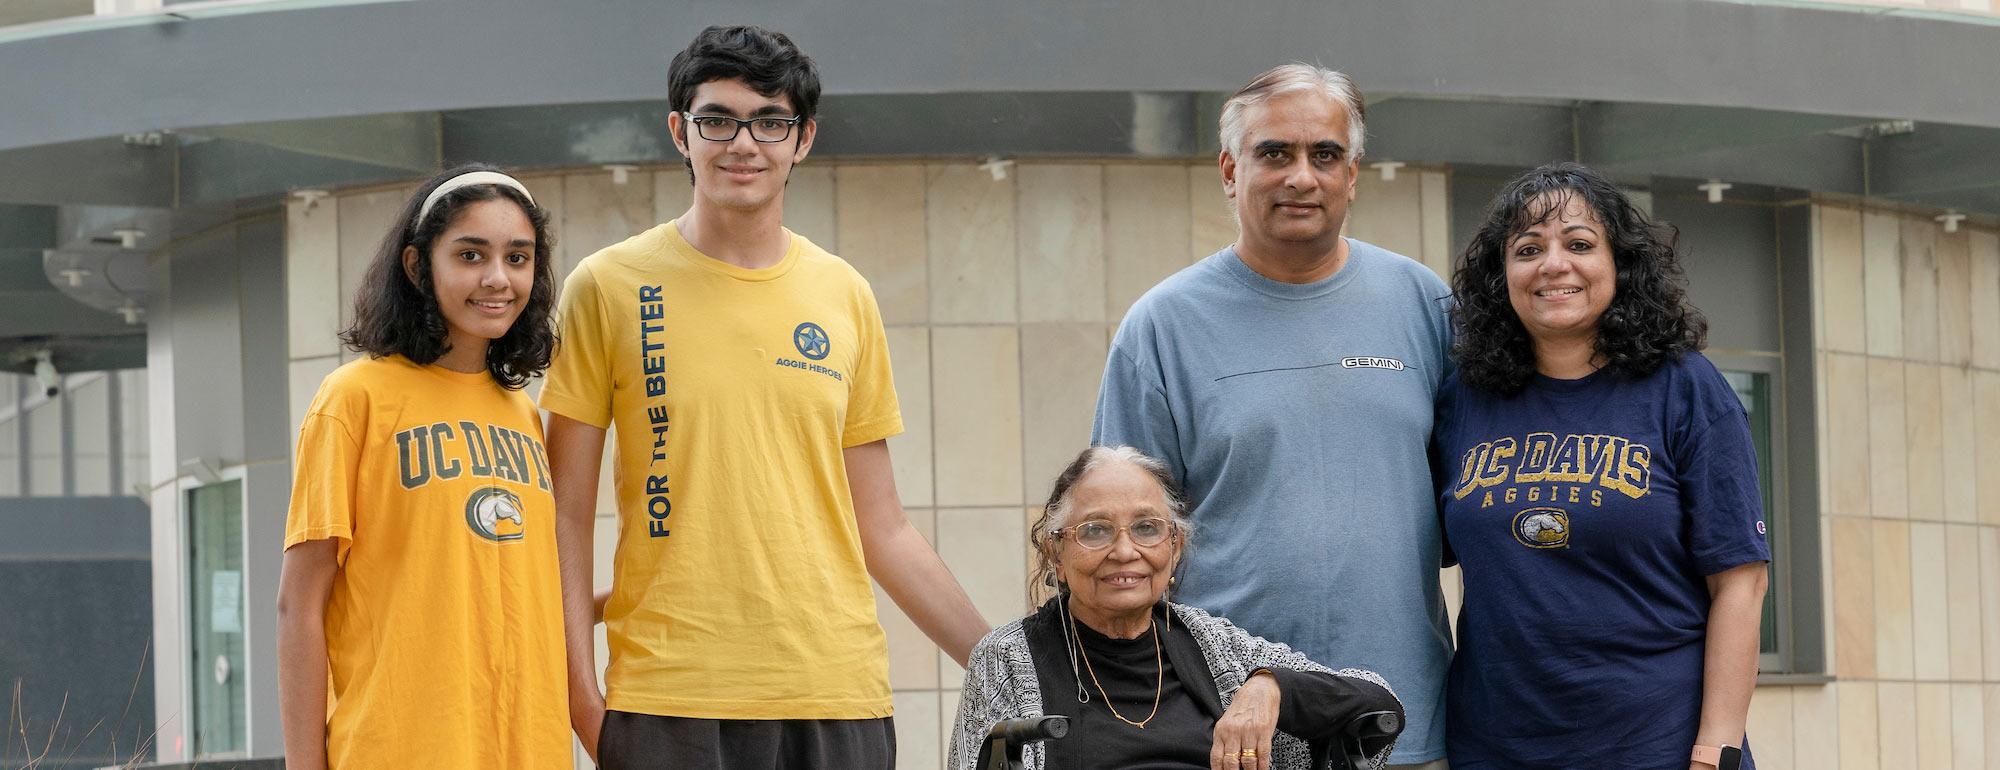 Three generations of a ֱ family pose for a portrait.